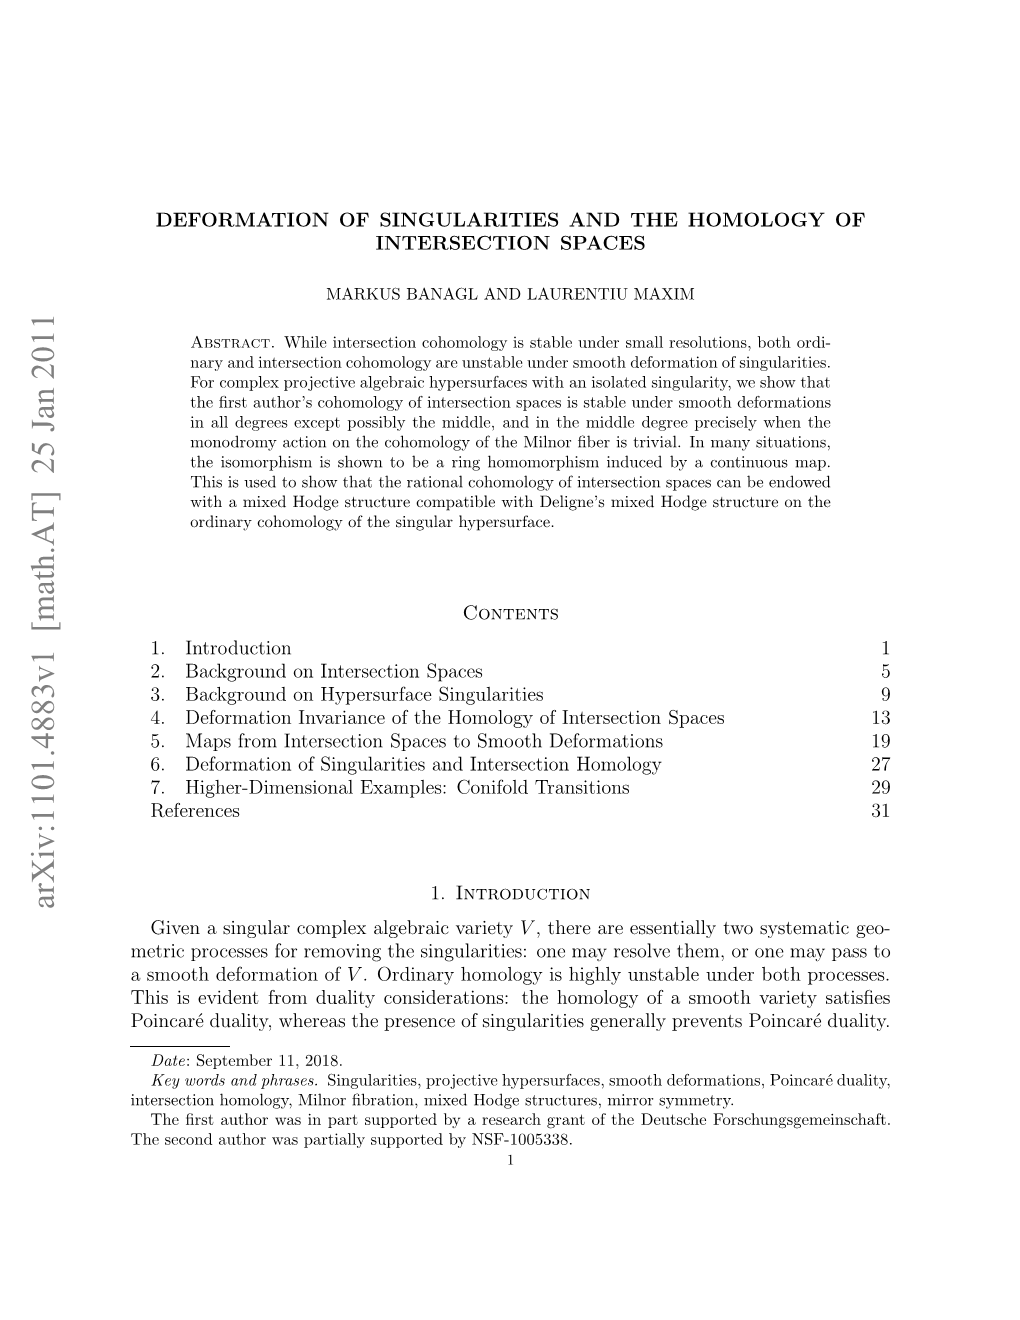 Deformation of Singularities and the Homology of Intersection Spaces